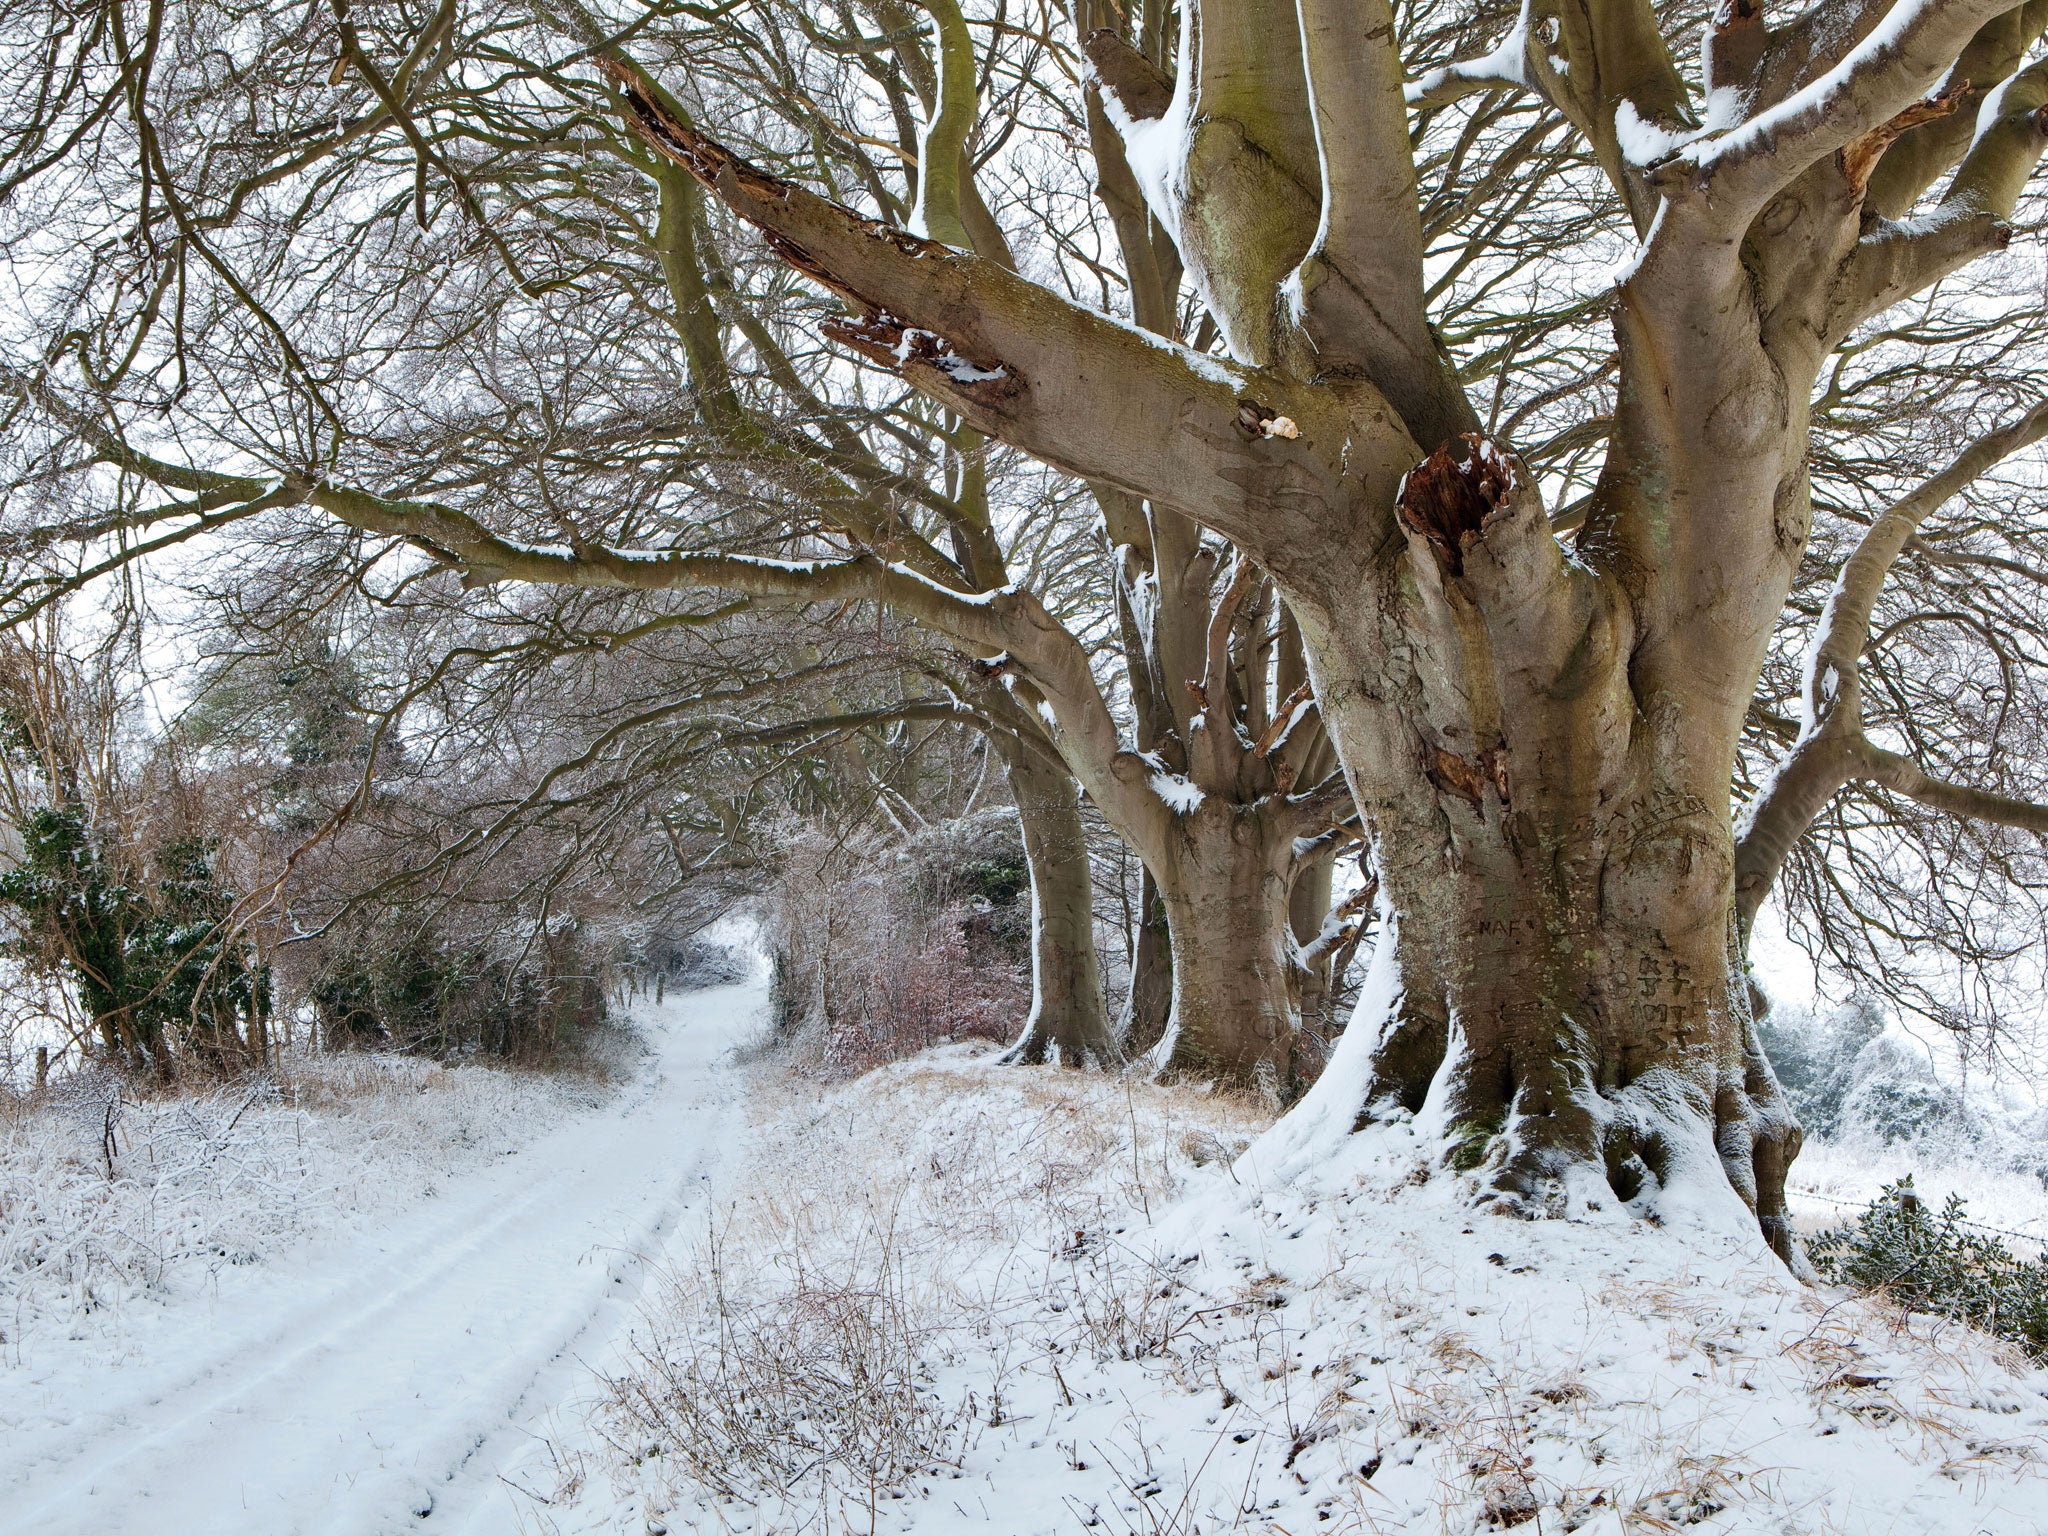 Winter lends this avenue of beech an ethereal beauty